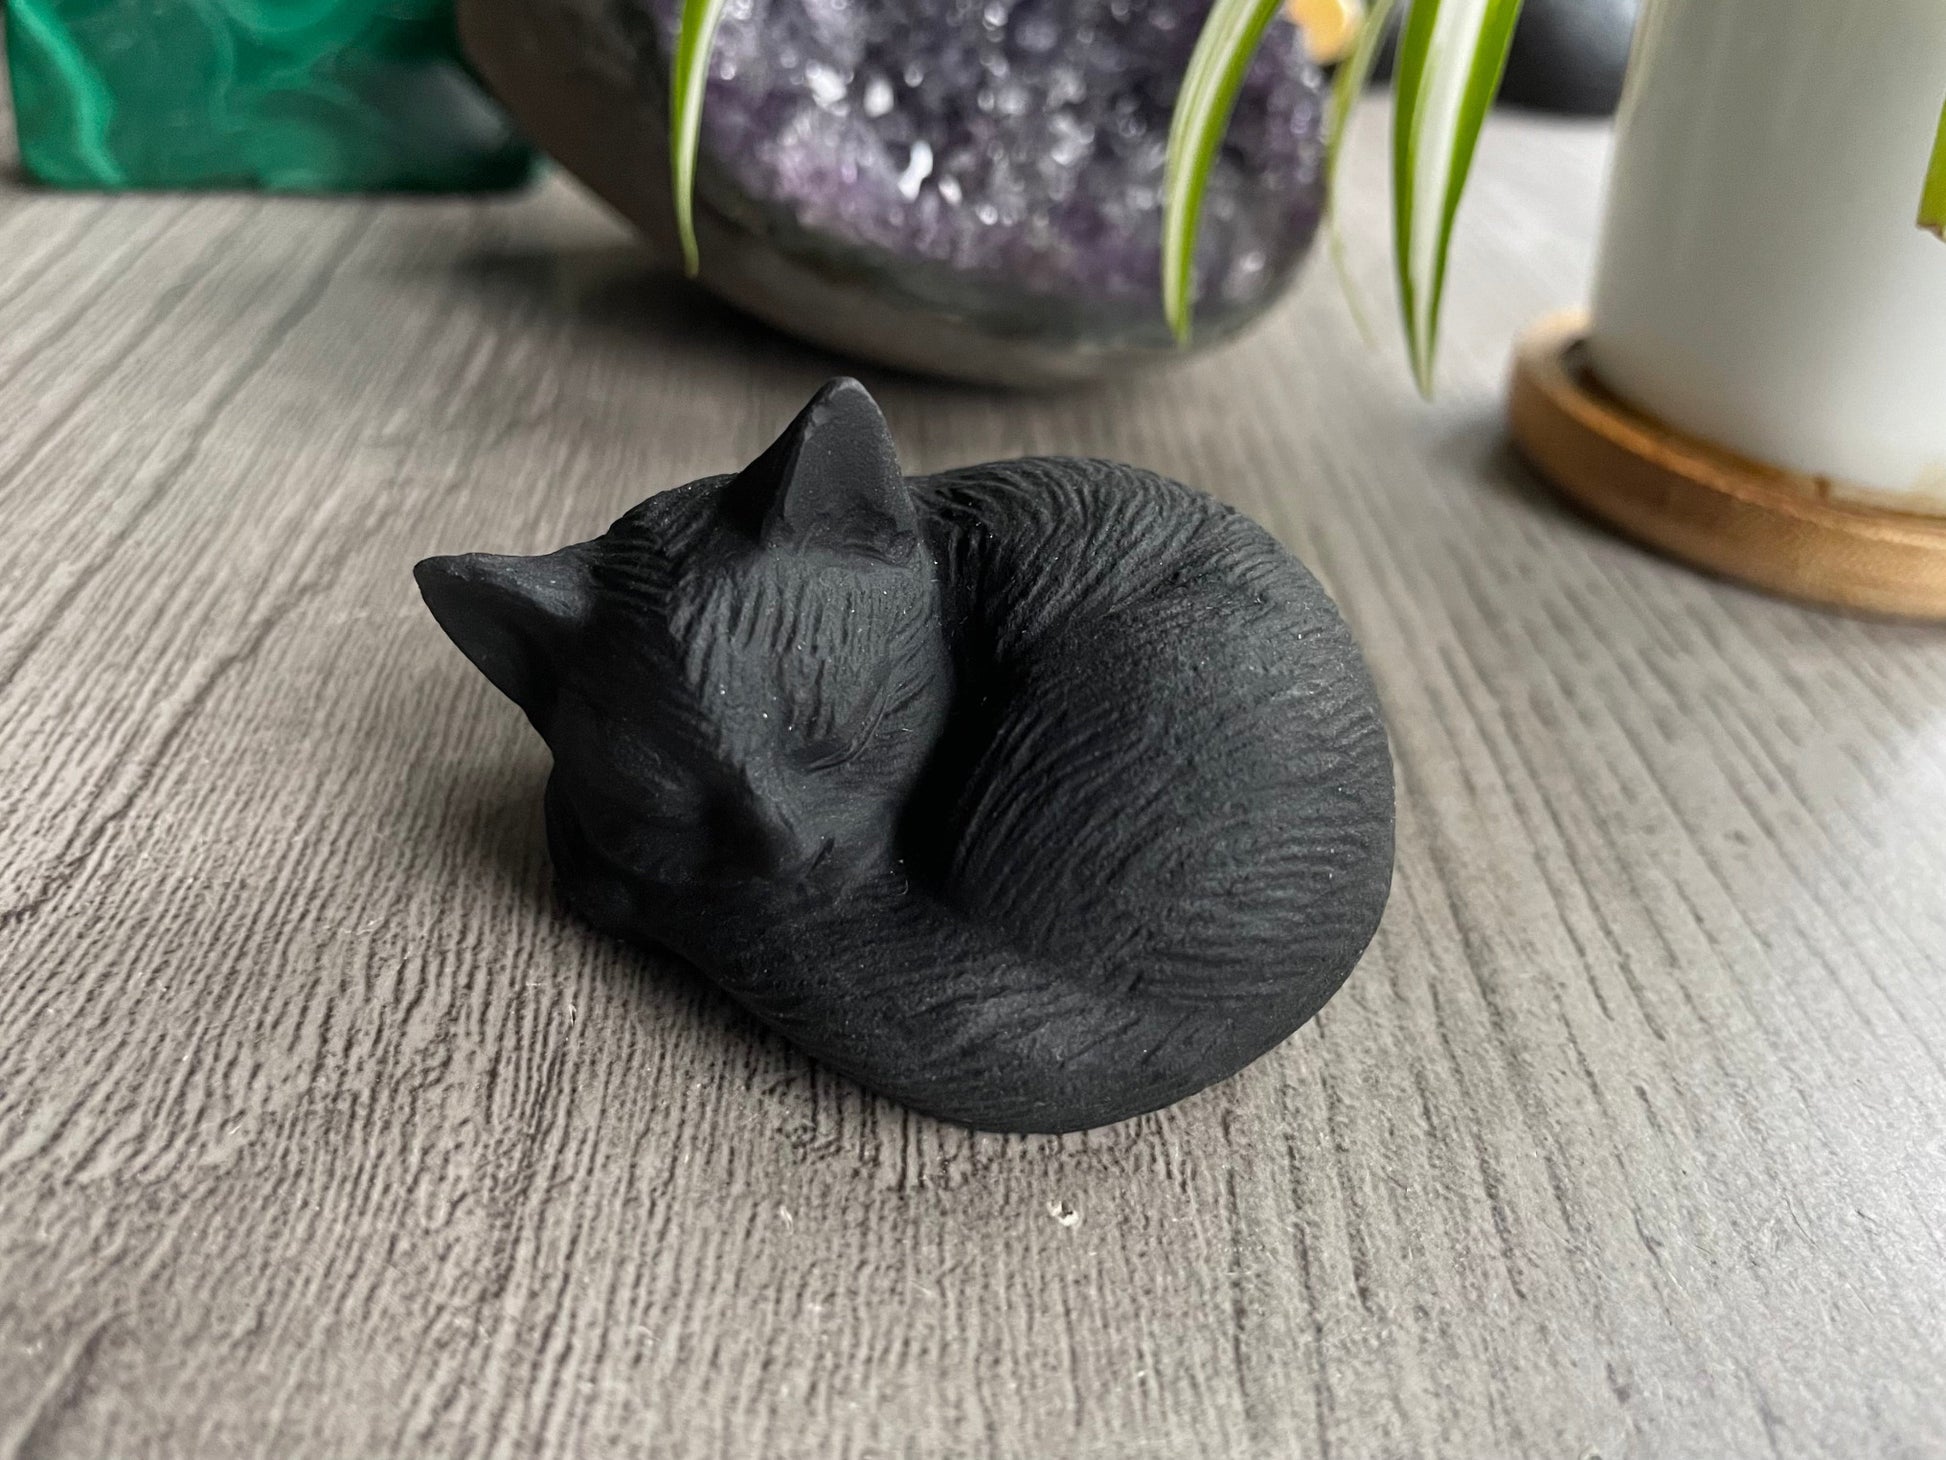 Pictured is a cat carved out of black obsidian.